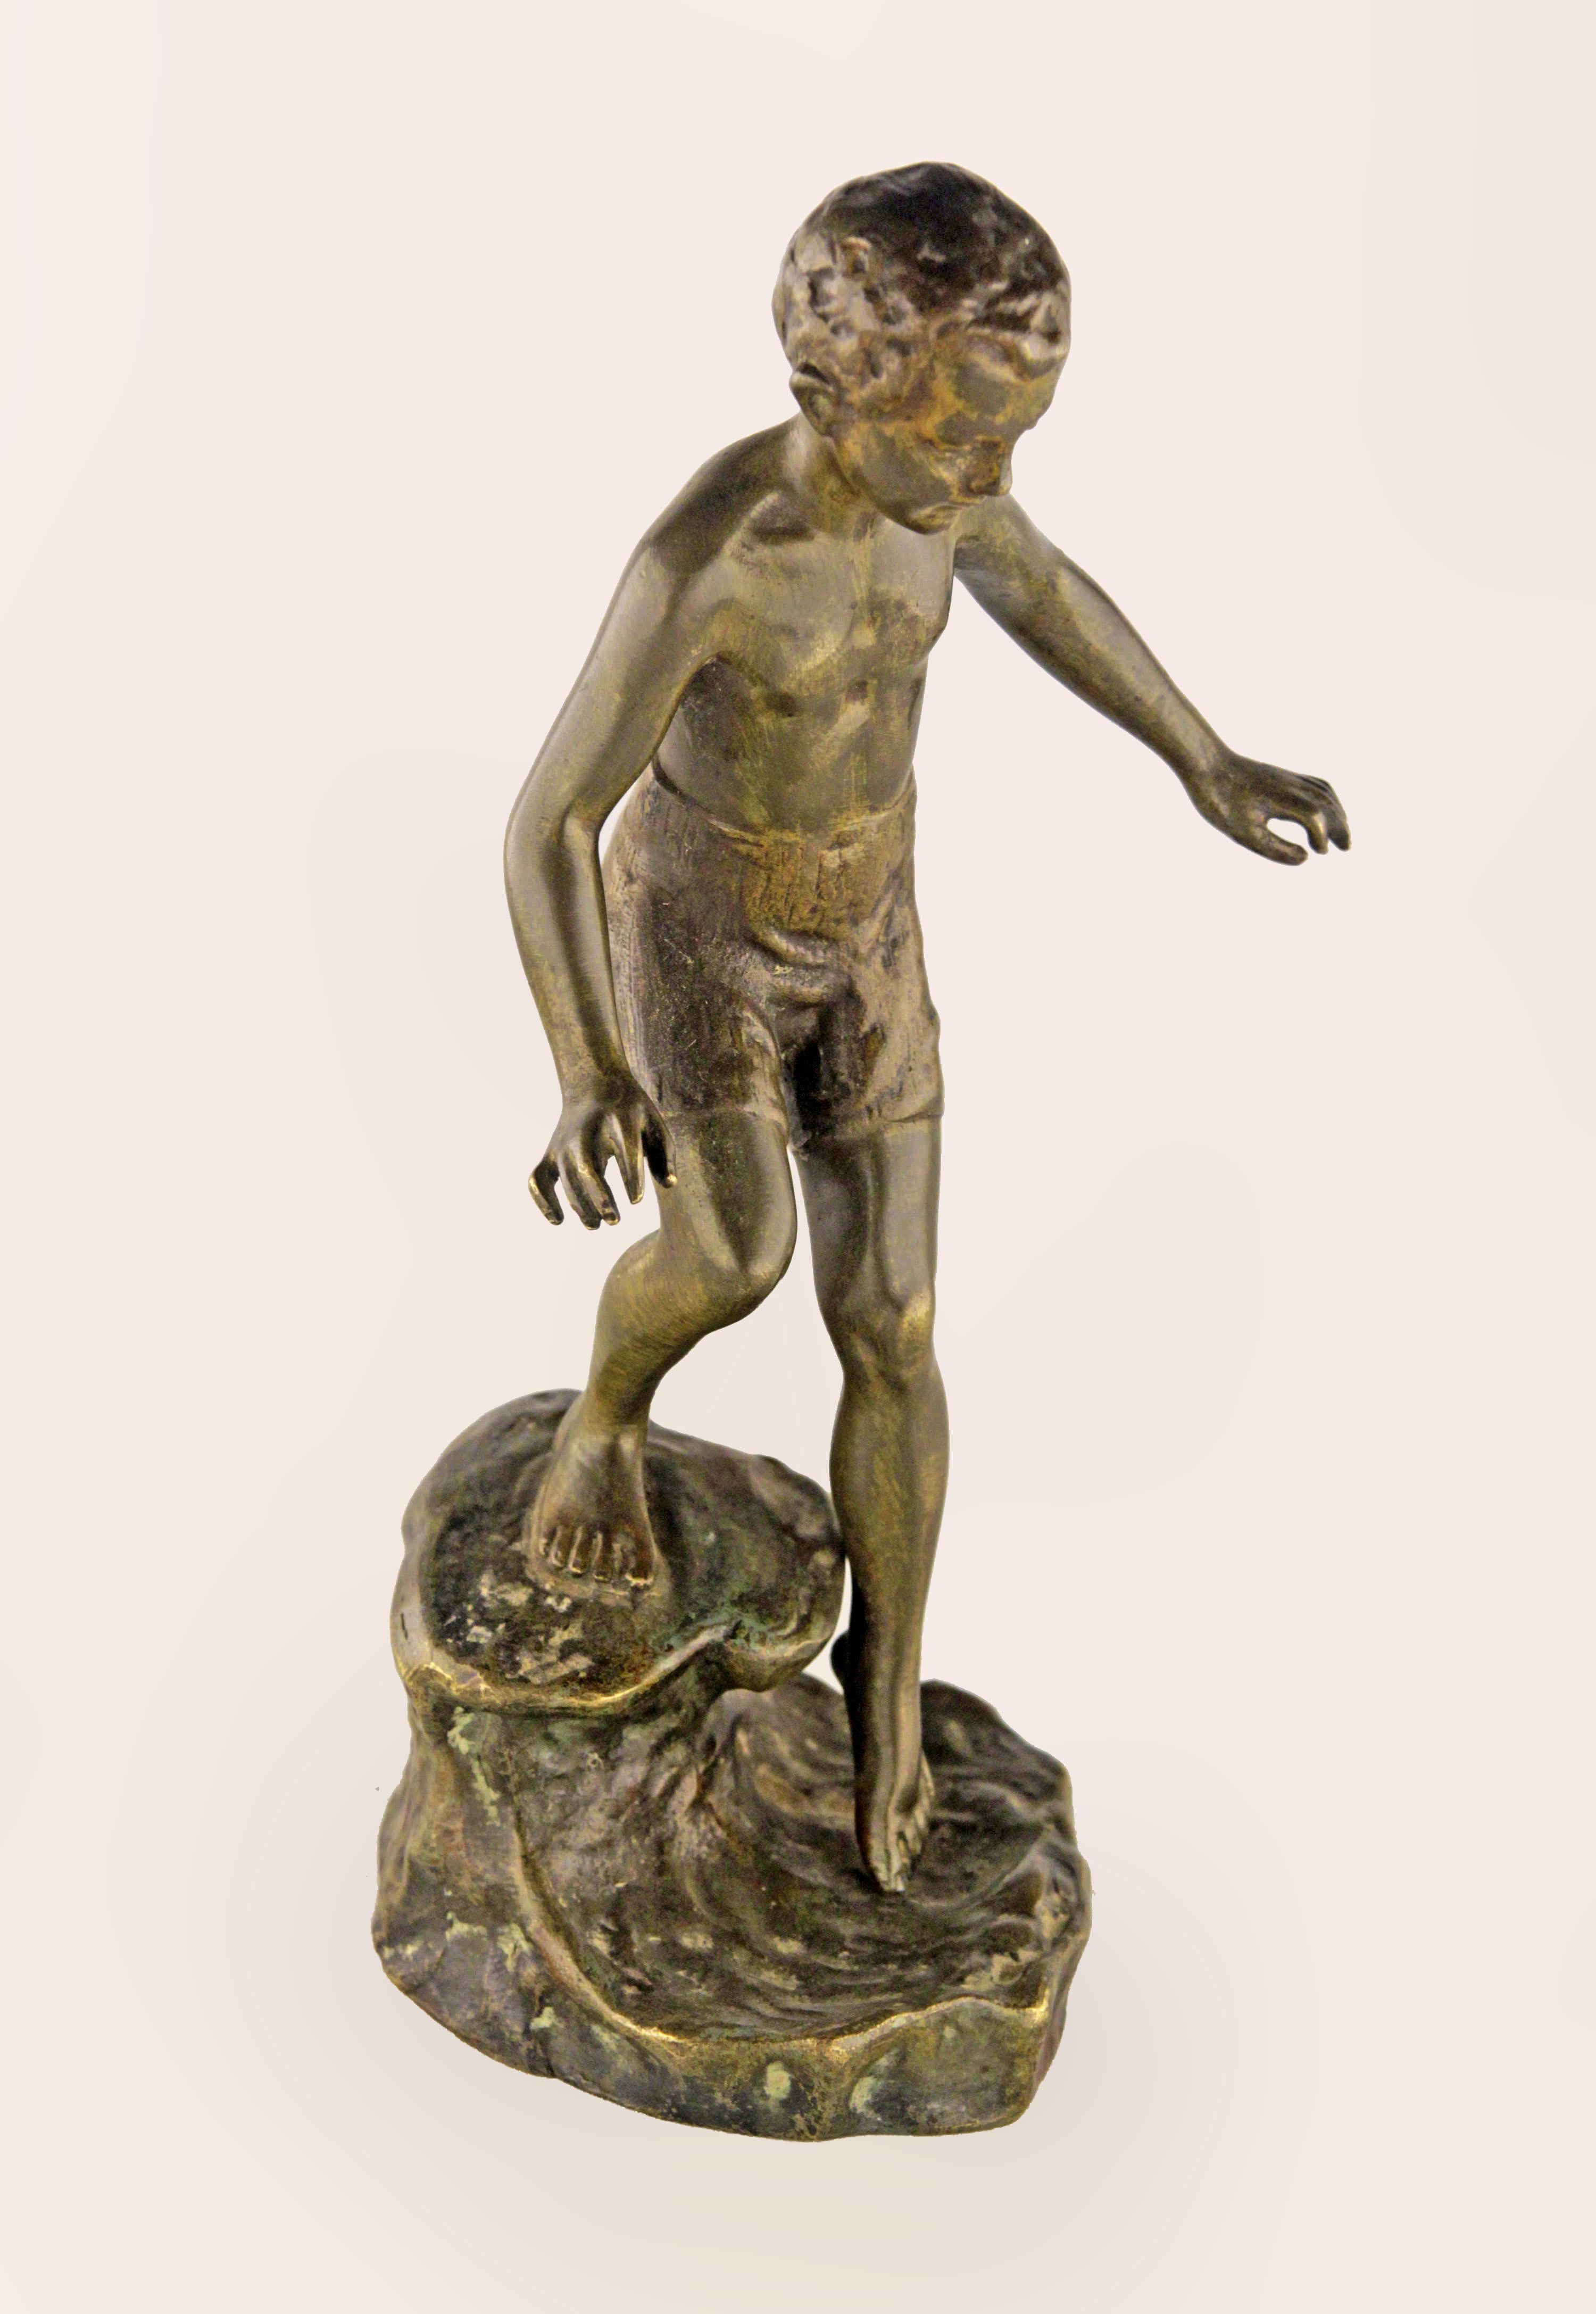 19th century Belle Époque bronze sculpture with greenish patina of a boy walking into water by sculptor Ruffino Besserdich

By: Ruffino Besserdich
Material: bronze, copper, metal
Technique: patinated, cast, molded, metalwork
Dimensions: 3 in x 2 in